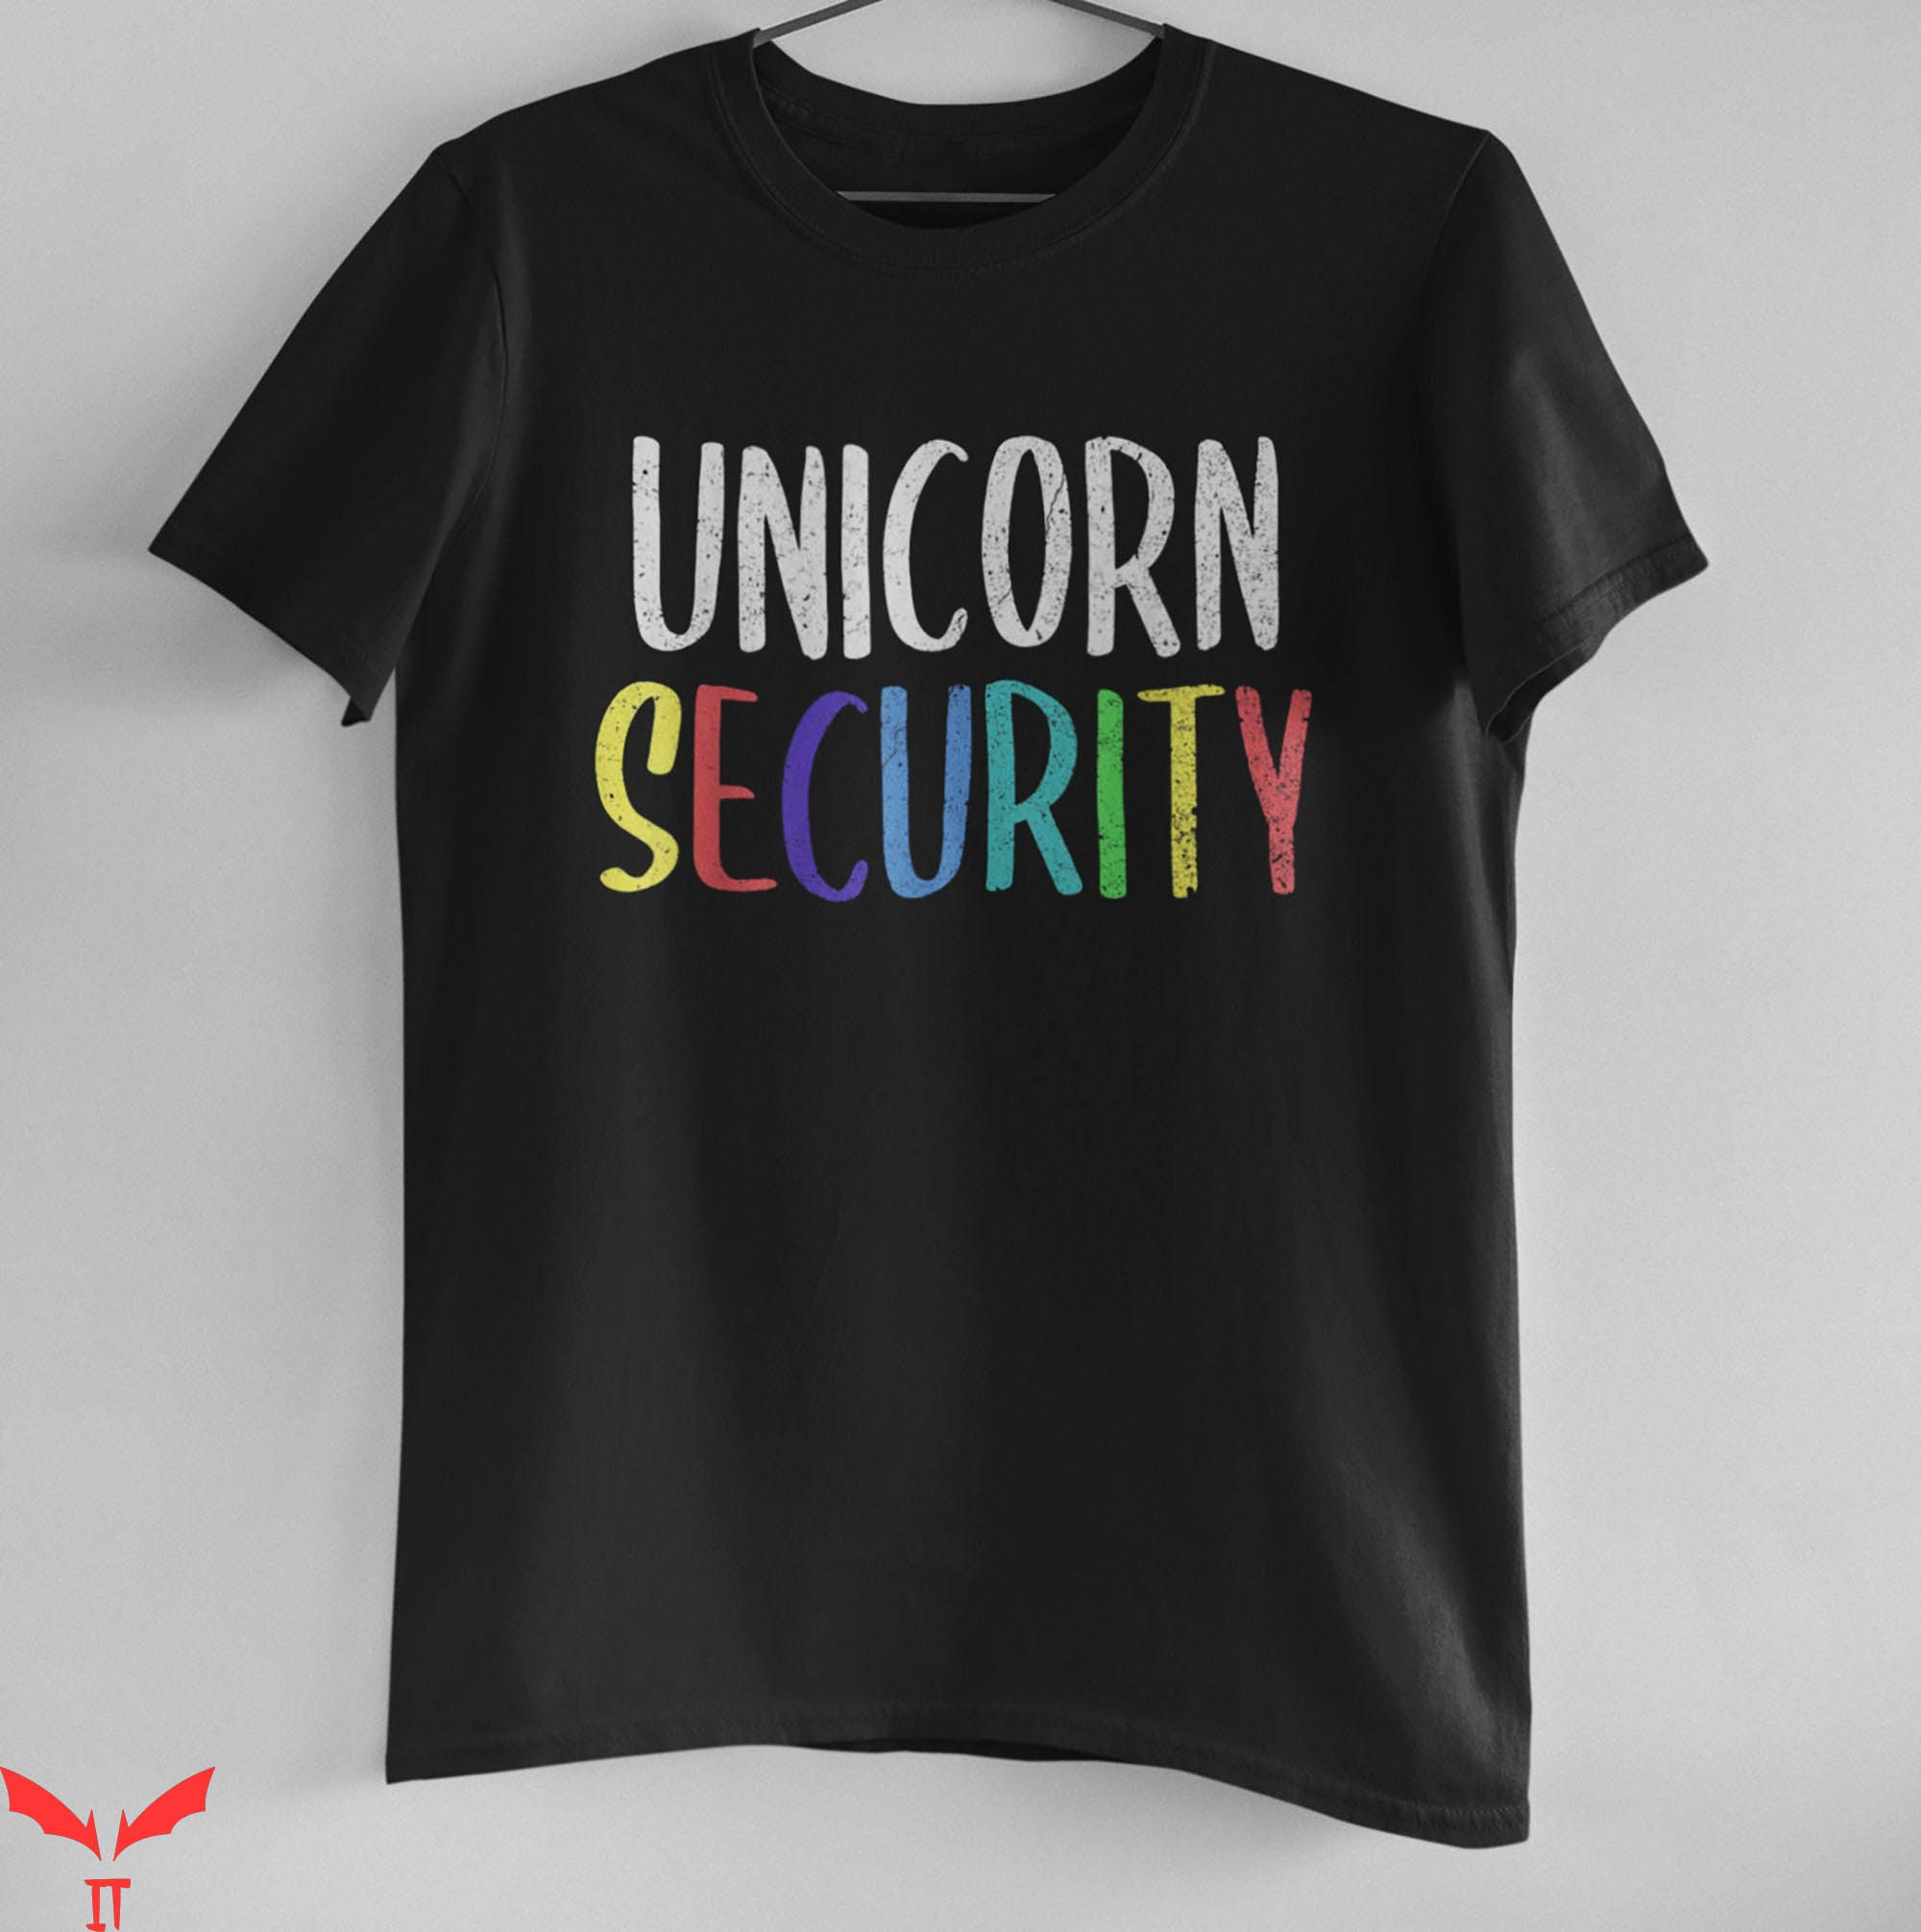 Security T-Shirt Unicorn Security Trendy Funny Style Tee